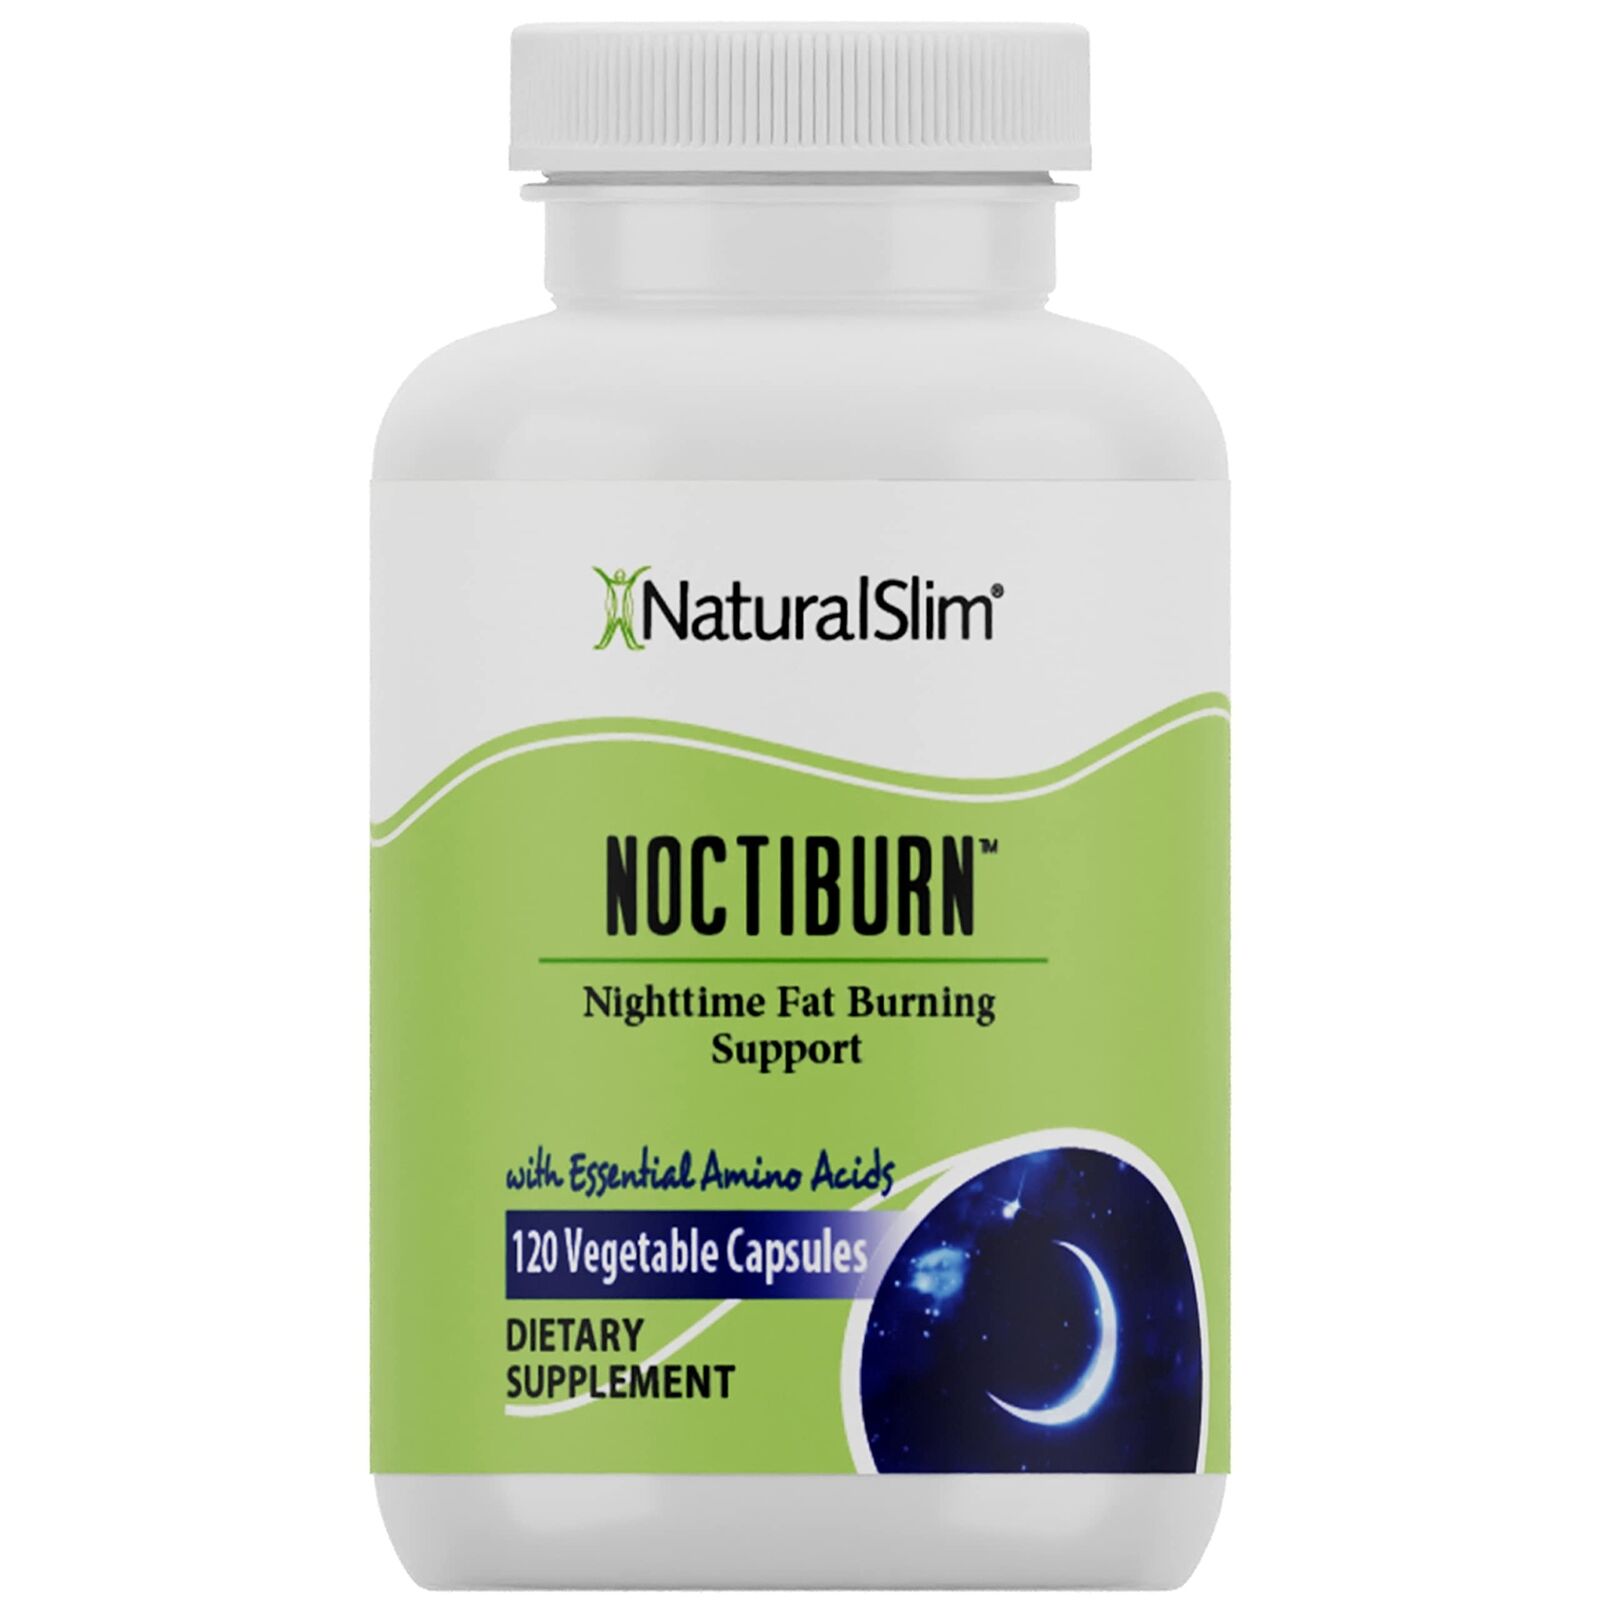 NoctiBurn – Nighttime Weight Support with Growth Hormone